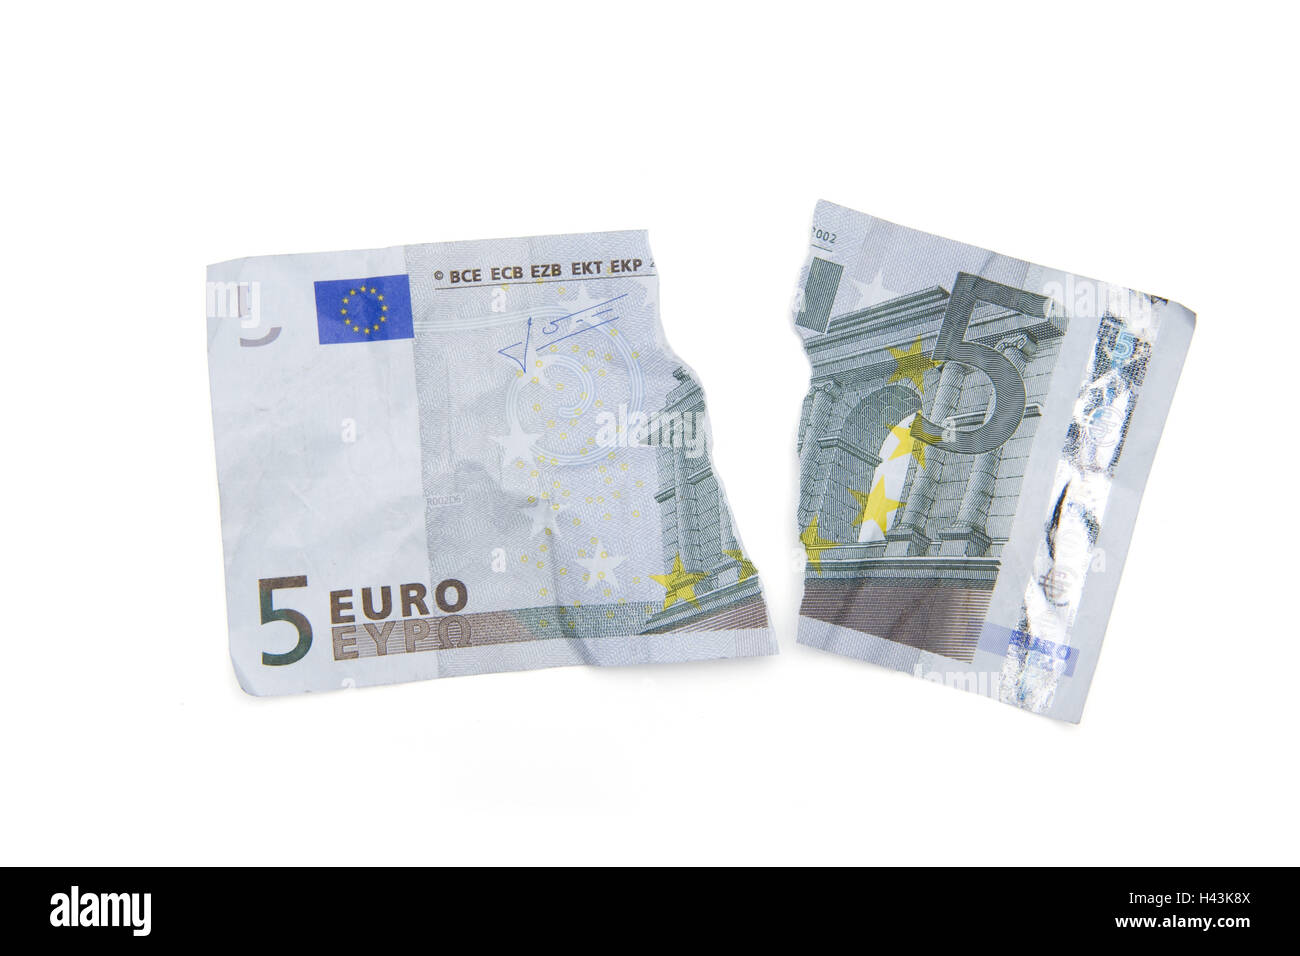 torn bank note, cut out, Stock Photo